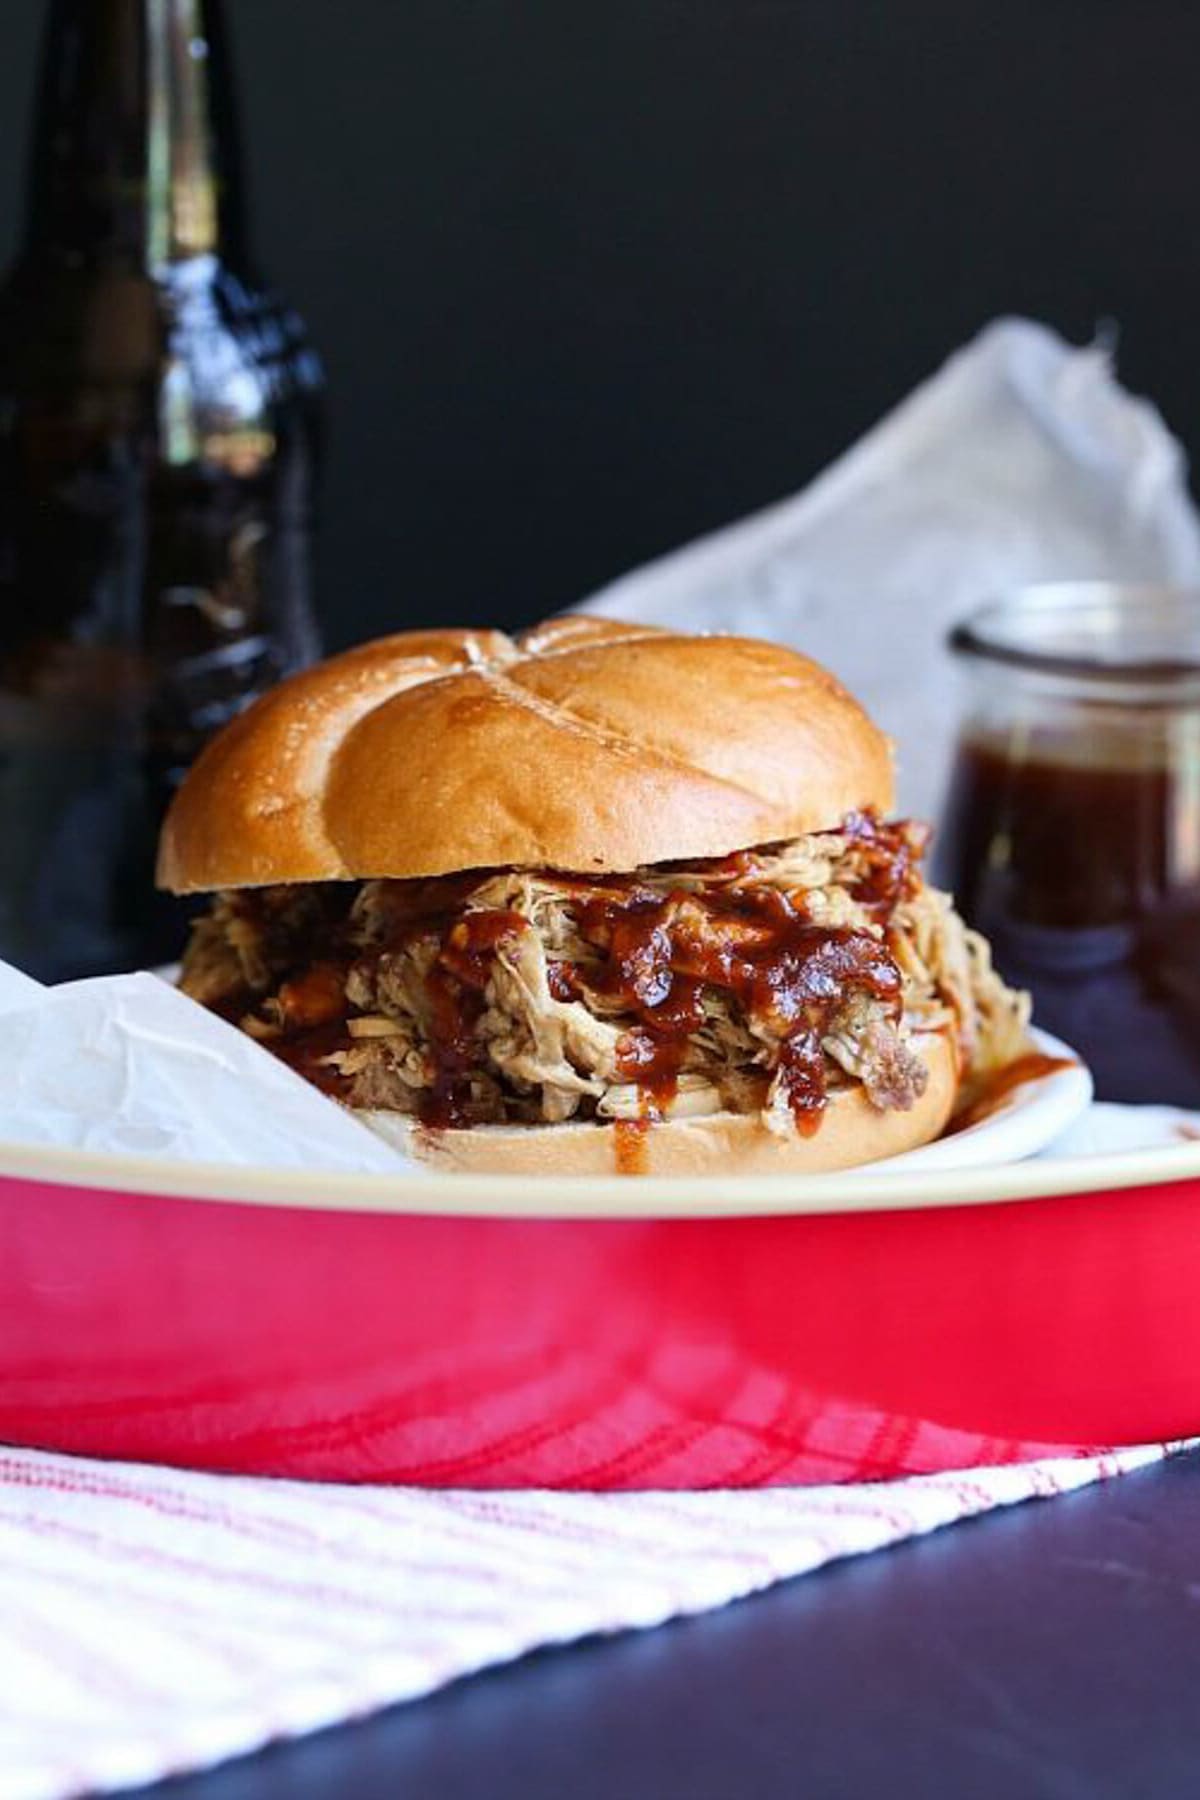 Root Beer Pulled Pork served to eat on a sandwich